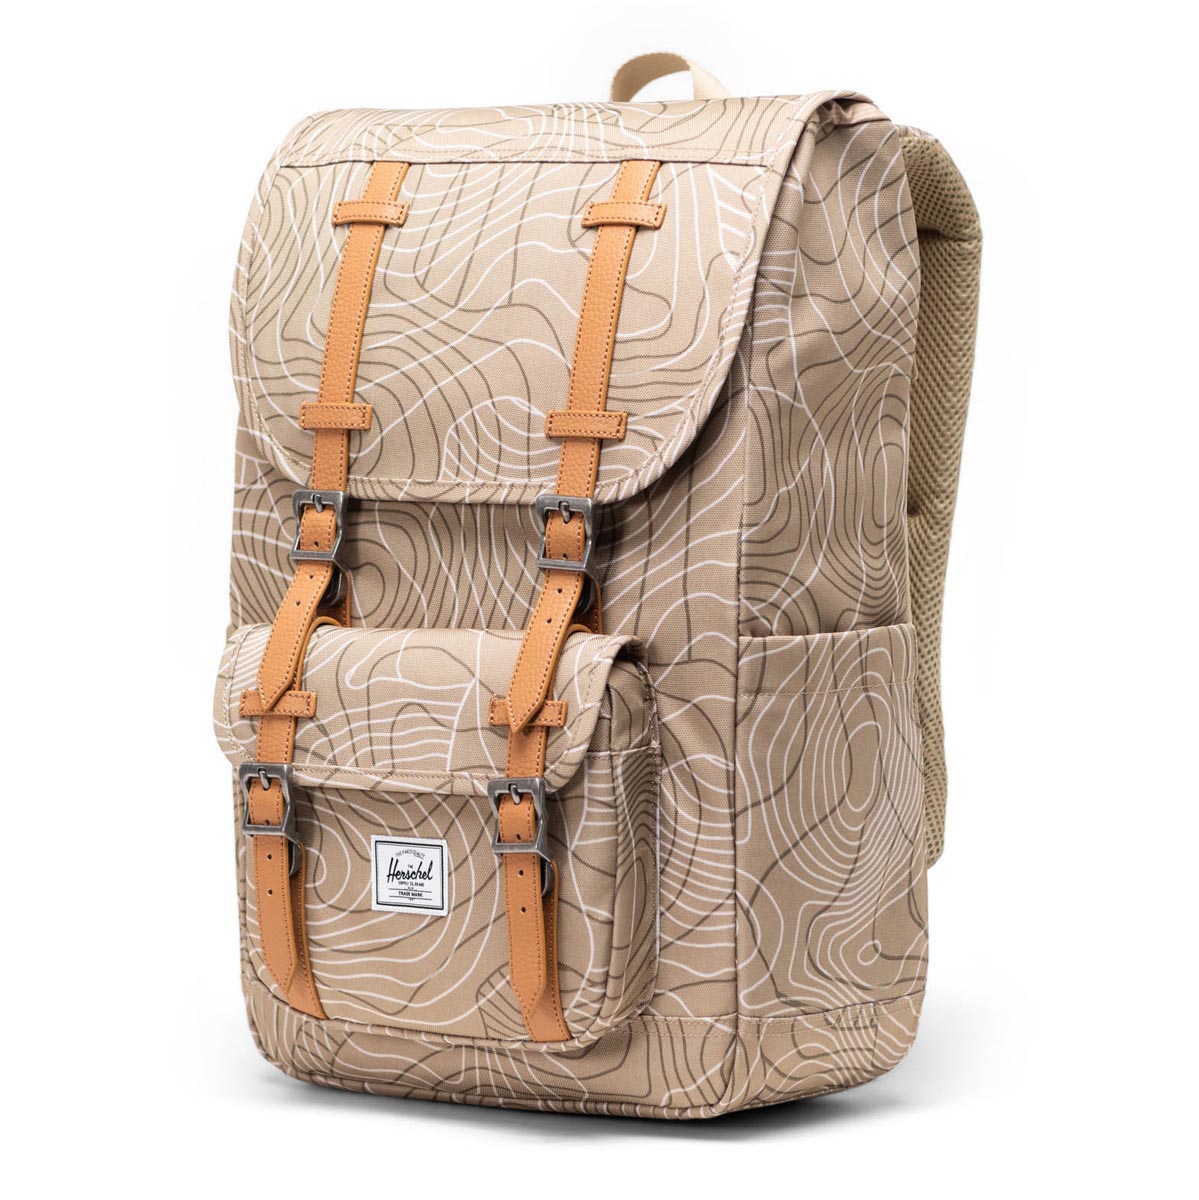 Herschel Supply Little America Mid Backpack - Twill Topography image 2